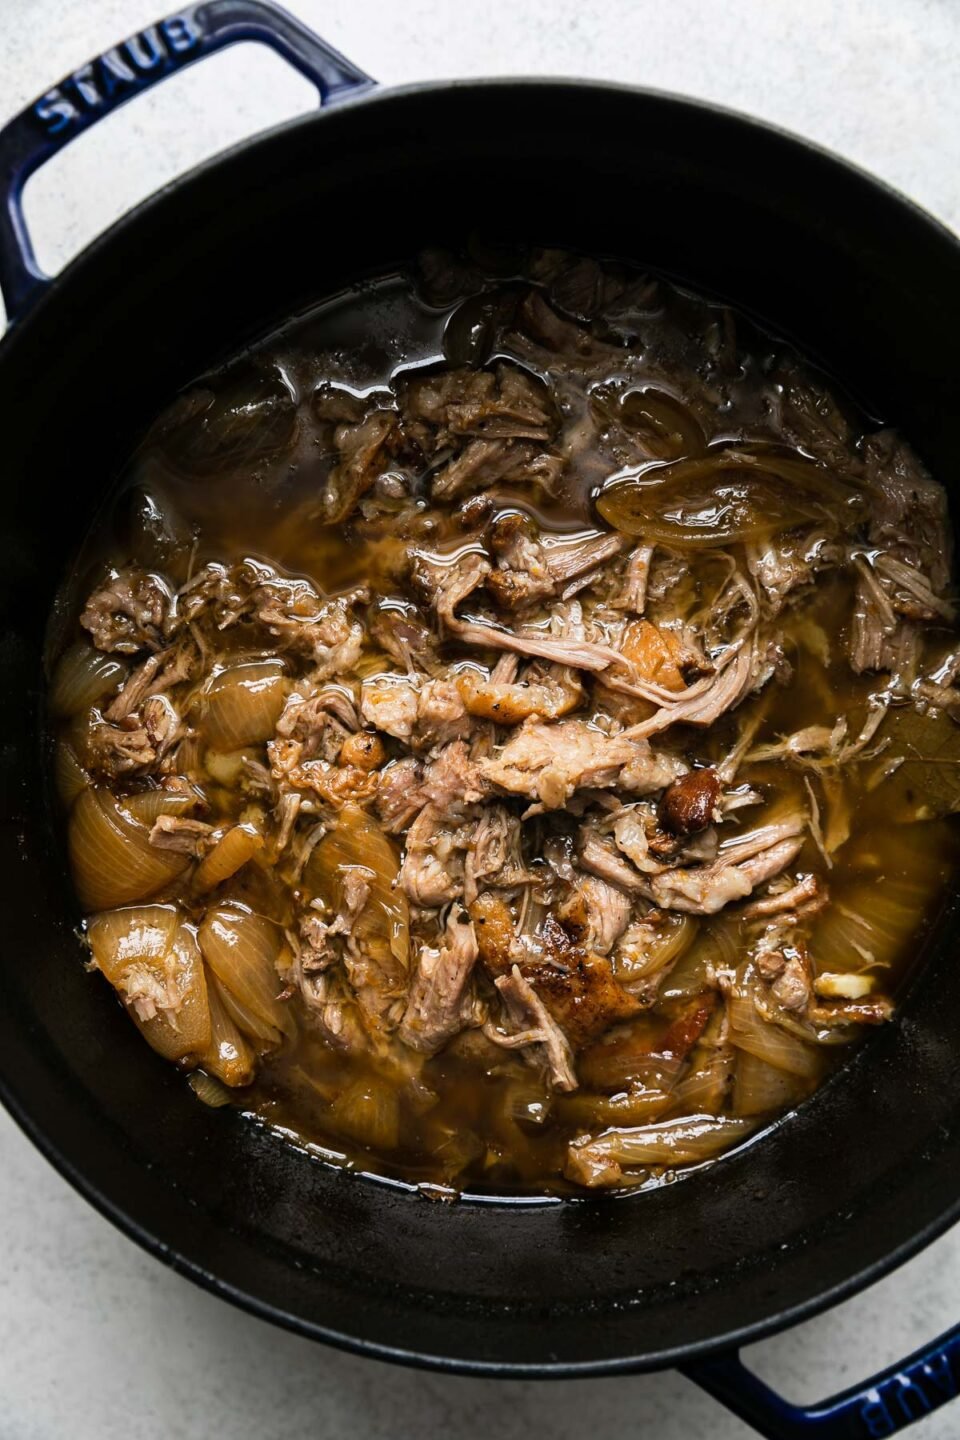 Cooked & shredded pork carnitas in a beer braise fill a dark navy Staub dutch oven. The dutch oven sits atop a creamy white textured surface.